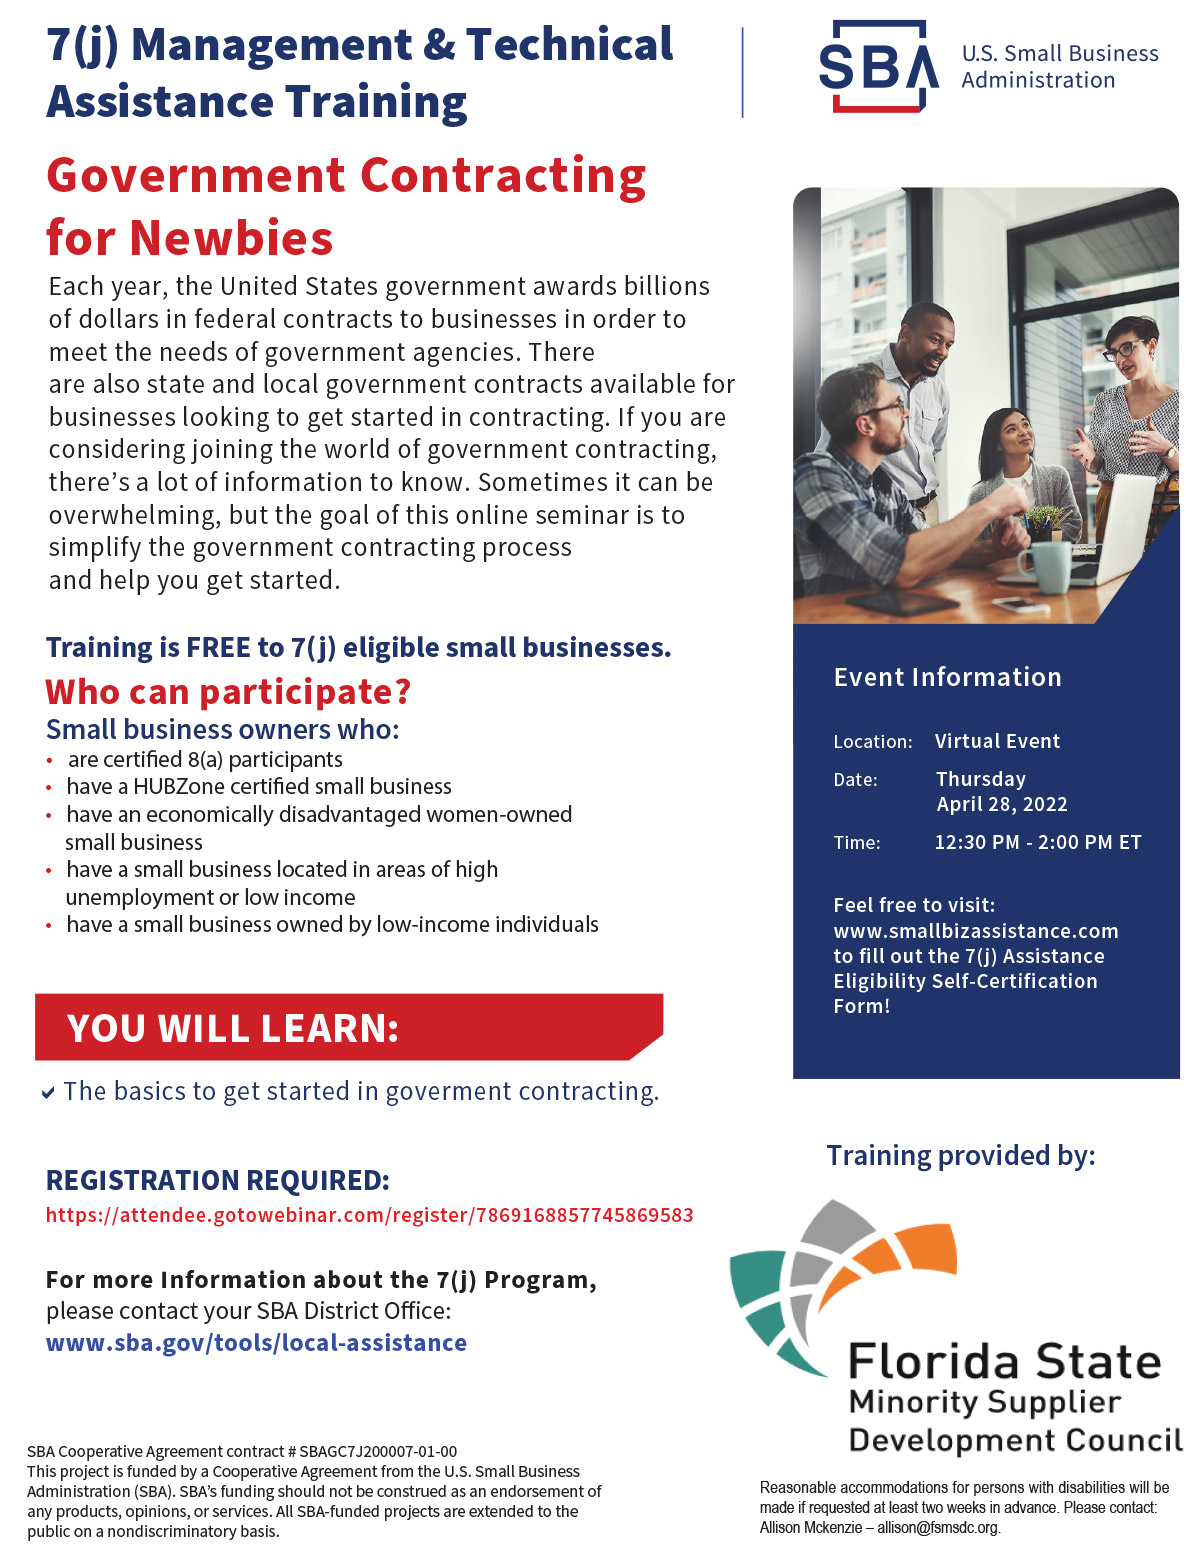 Government Contracting for Newbies